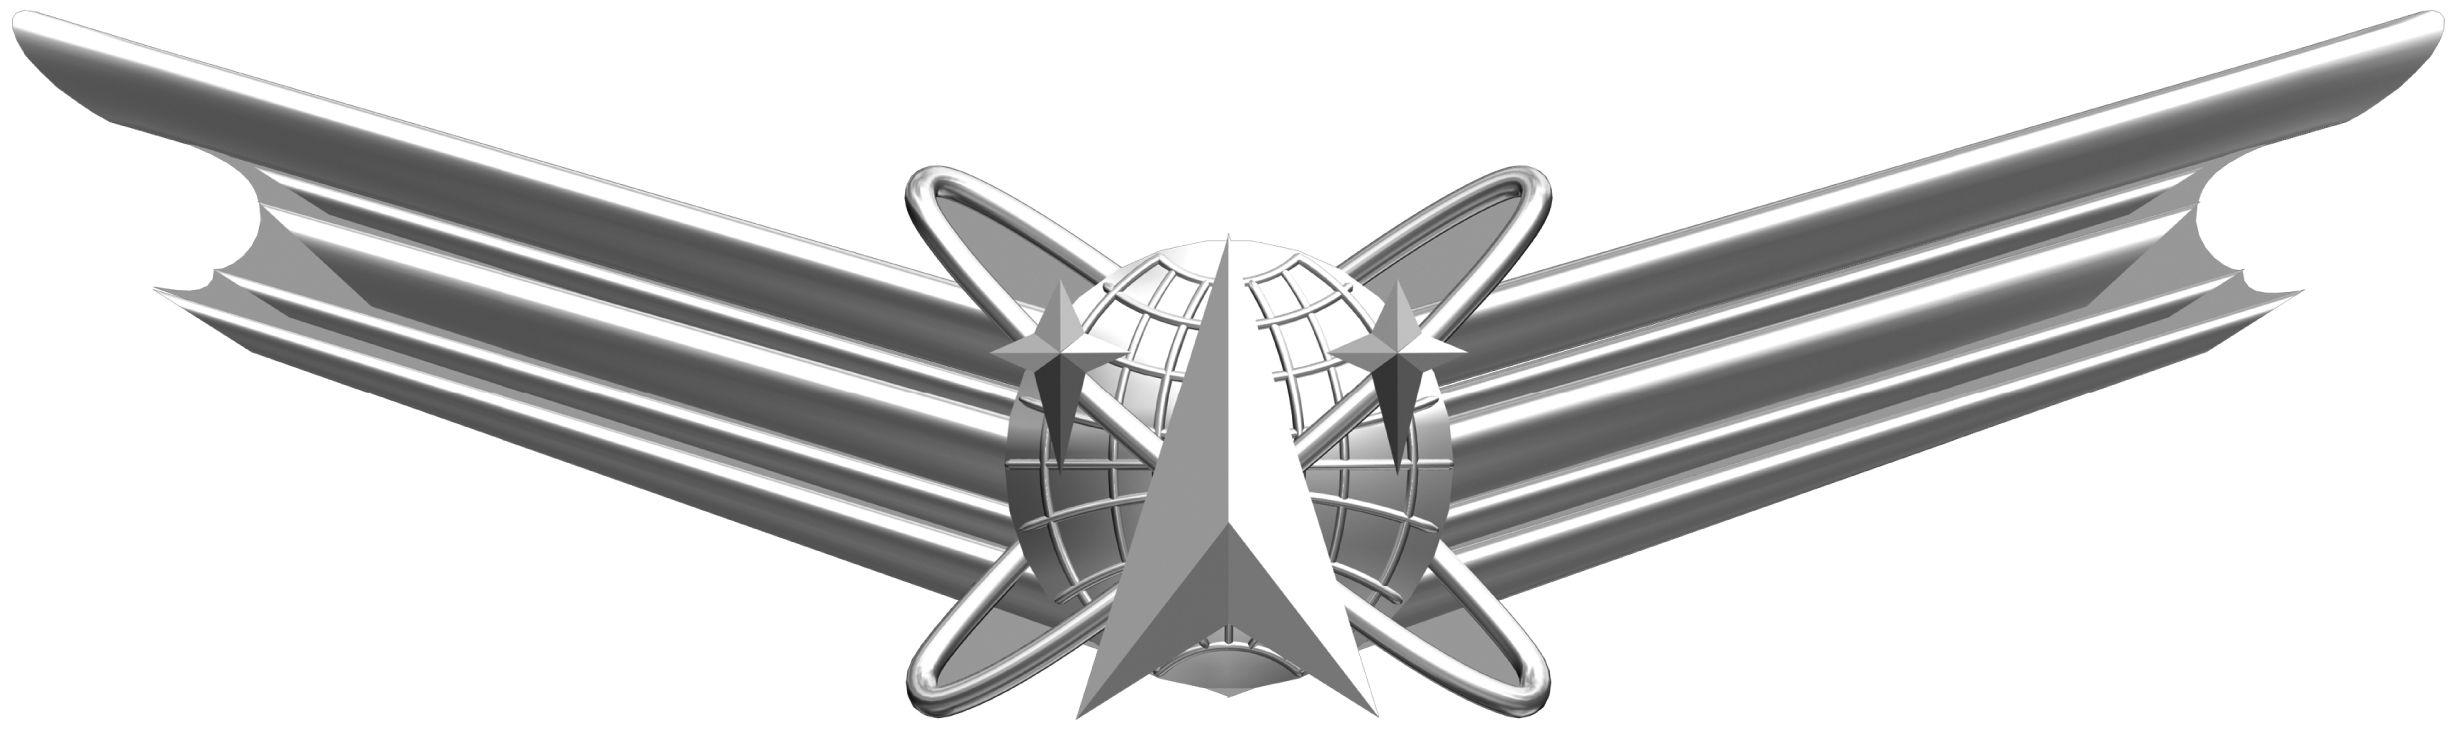 Space Air Force Logo - File:Basic Space Badge.jpg - Wikimedia Commons